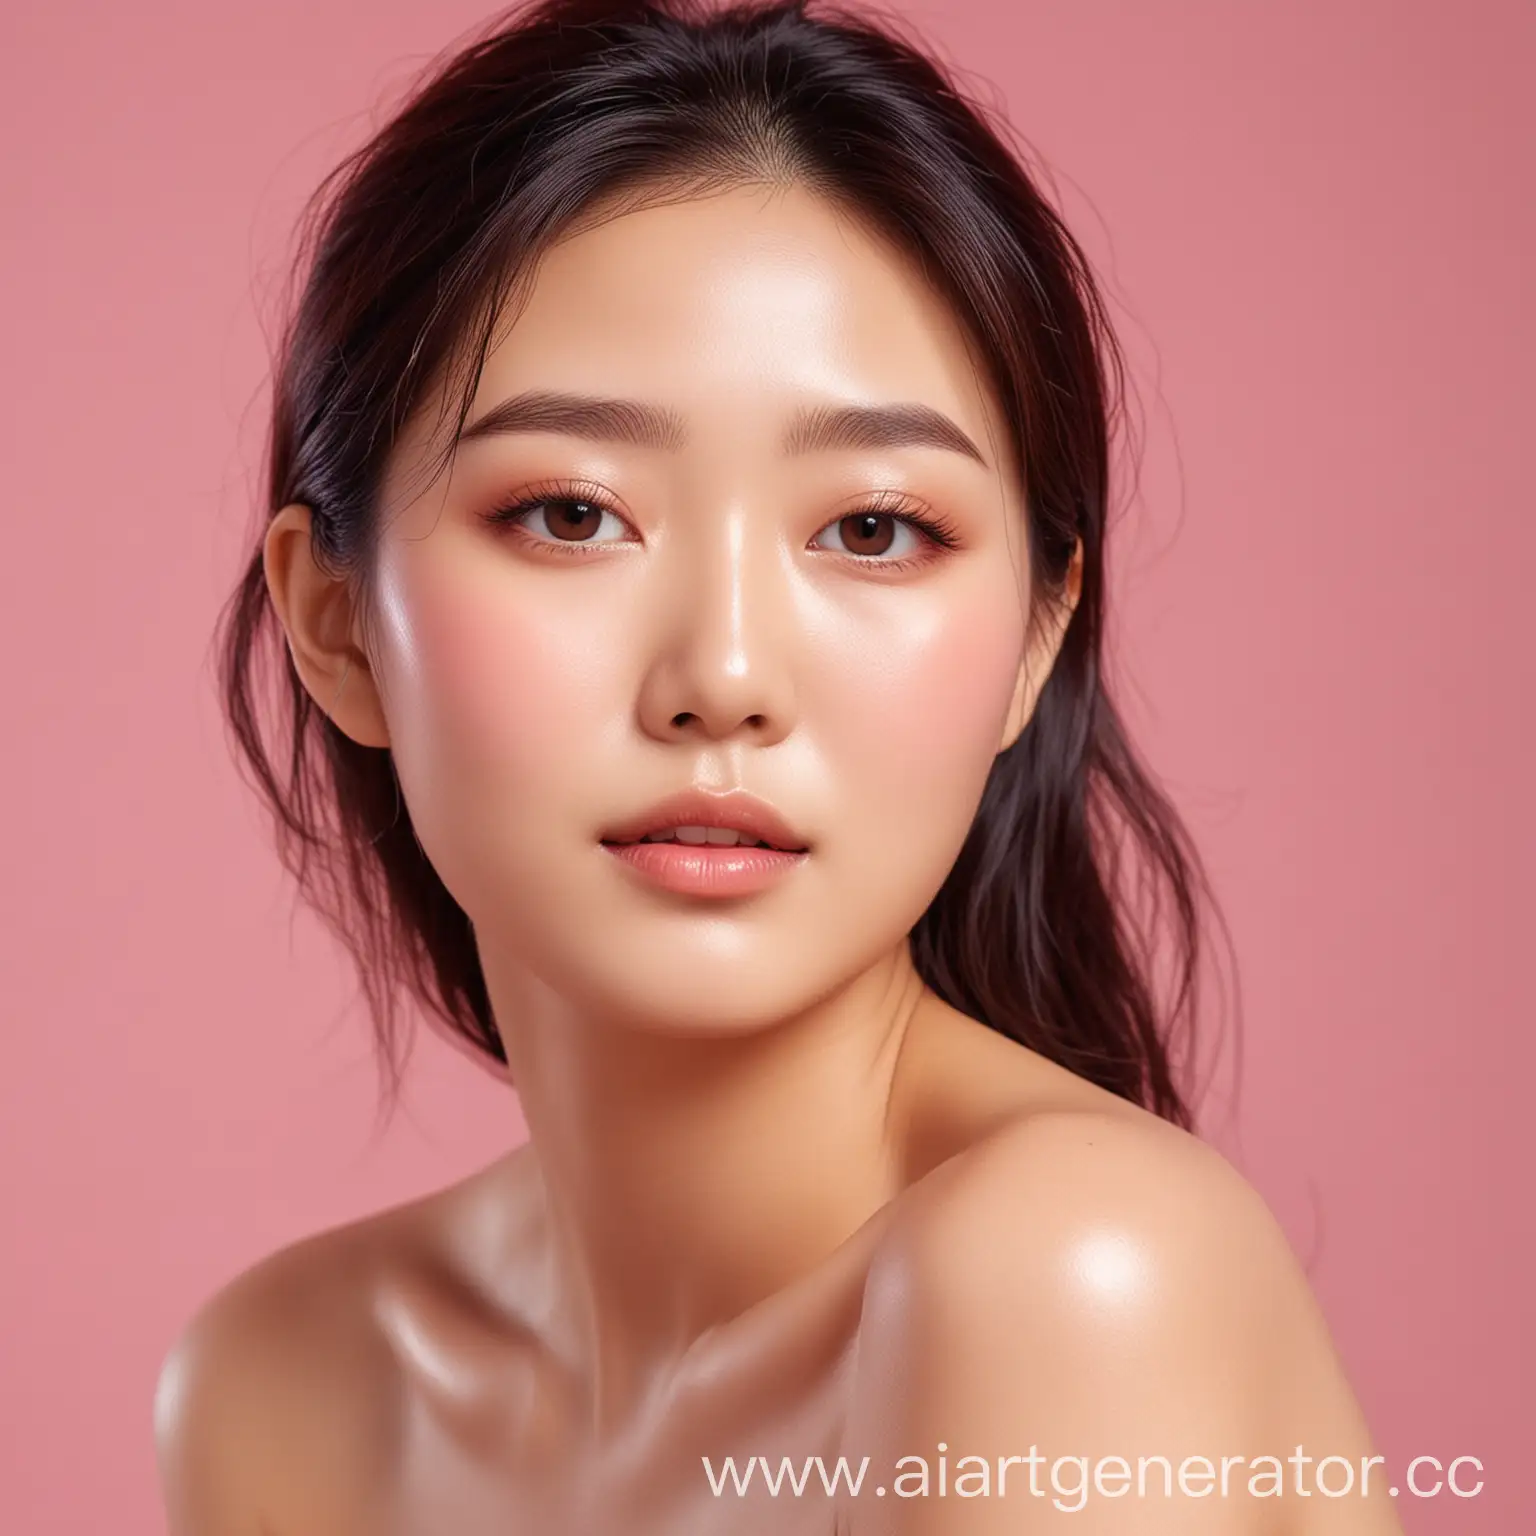 Beautiful-Korean-Woman-with-Glowing-Skin-on-a-Tender-Pink-Background